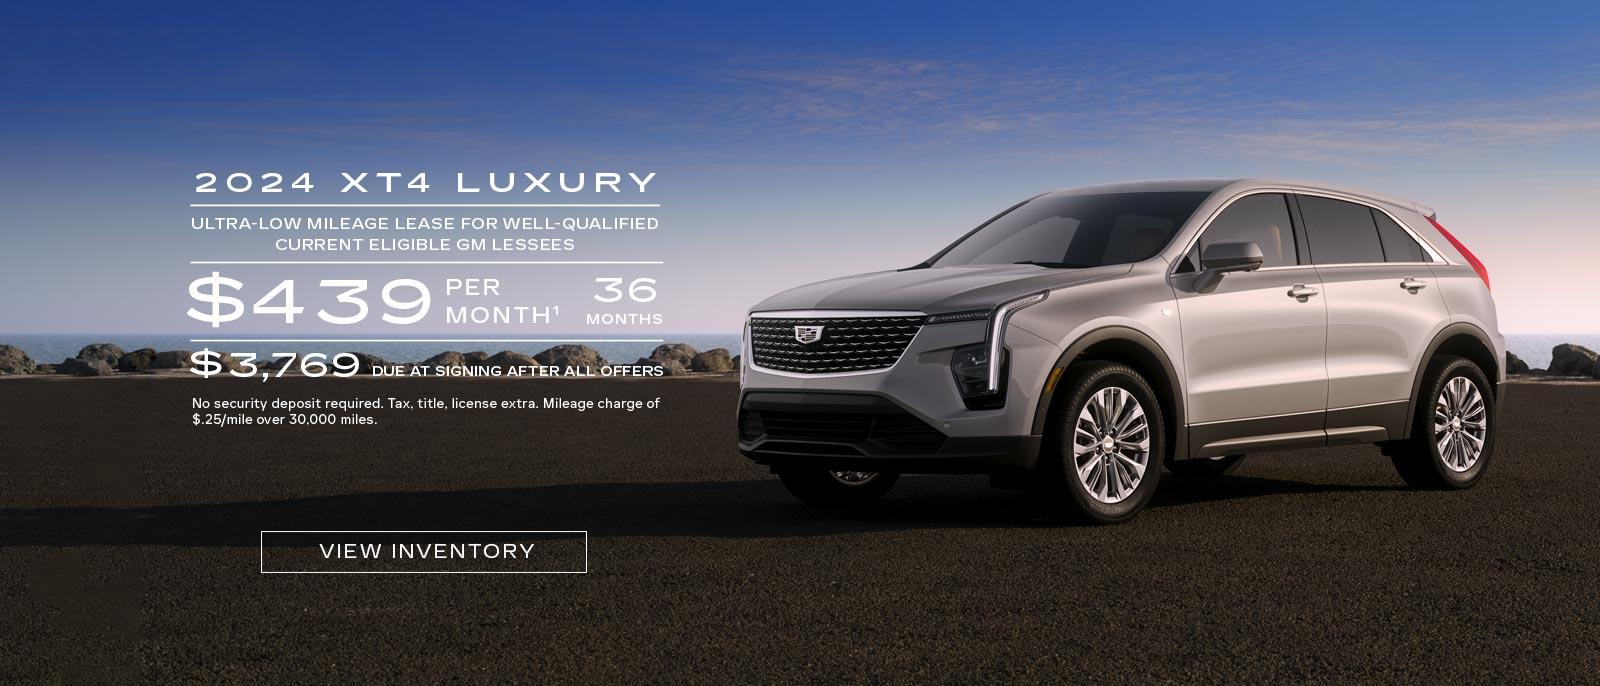 2024 XT4 Luxury Ultra-low mileage lease for well-qualified current eligible GM lessees. $439 per month. 36 months. $3,769 Due at signing after all offers.